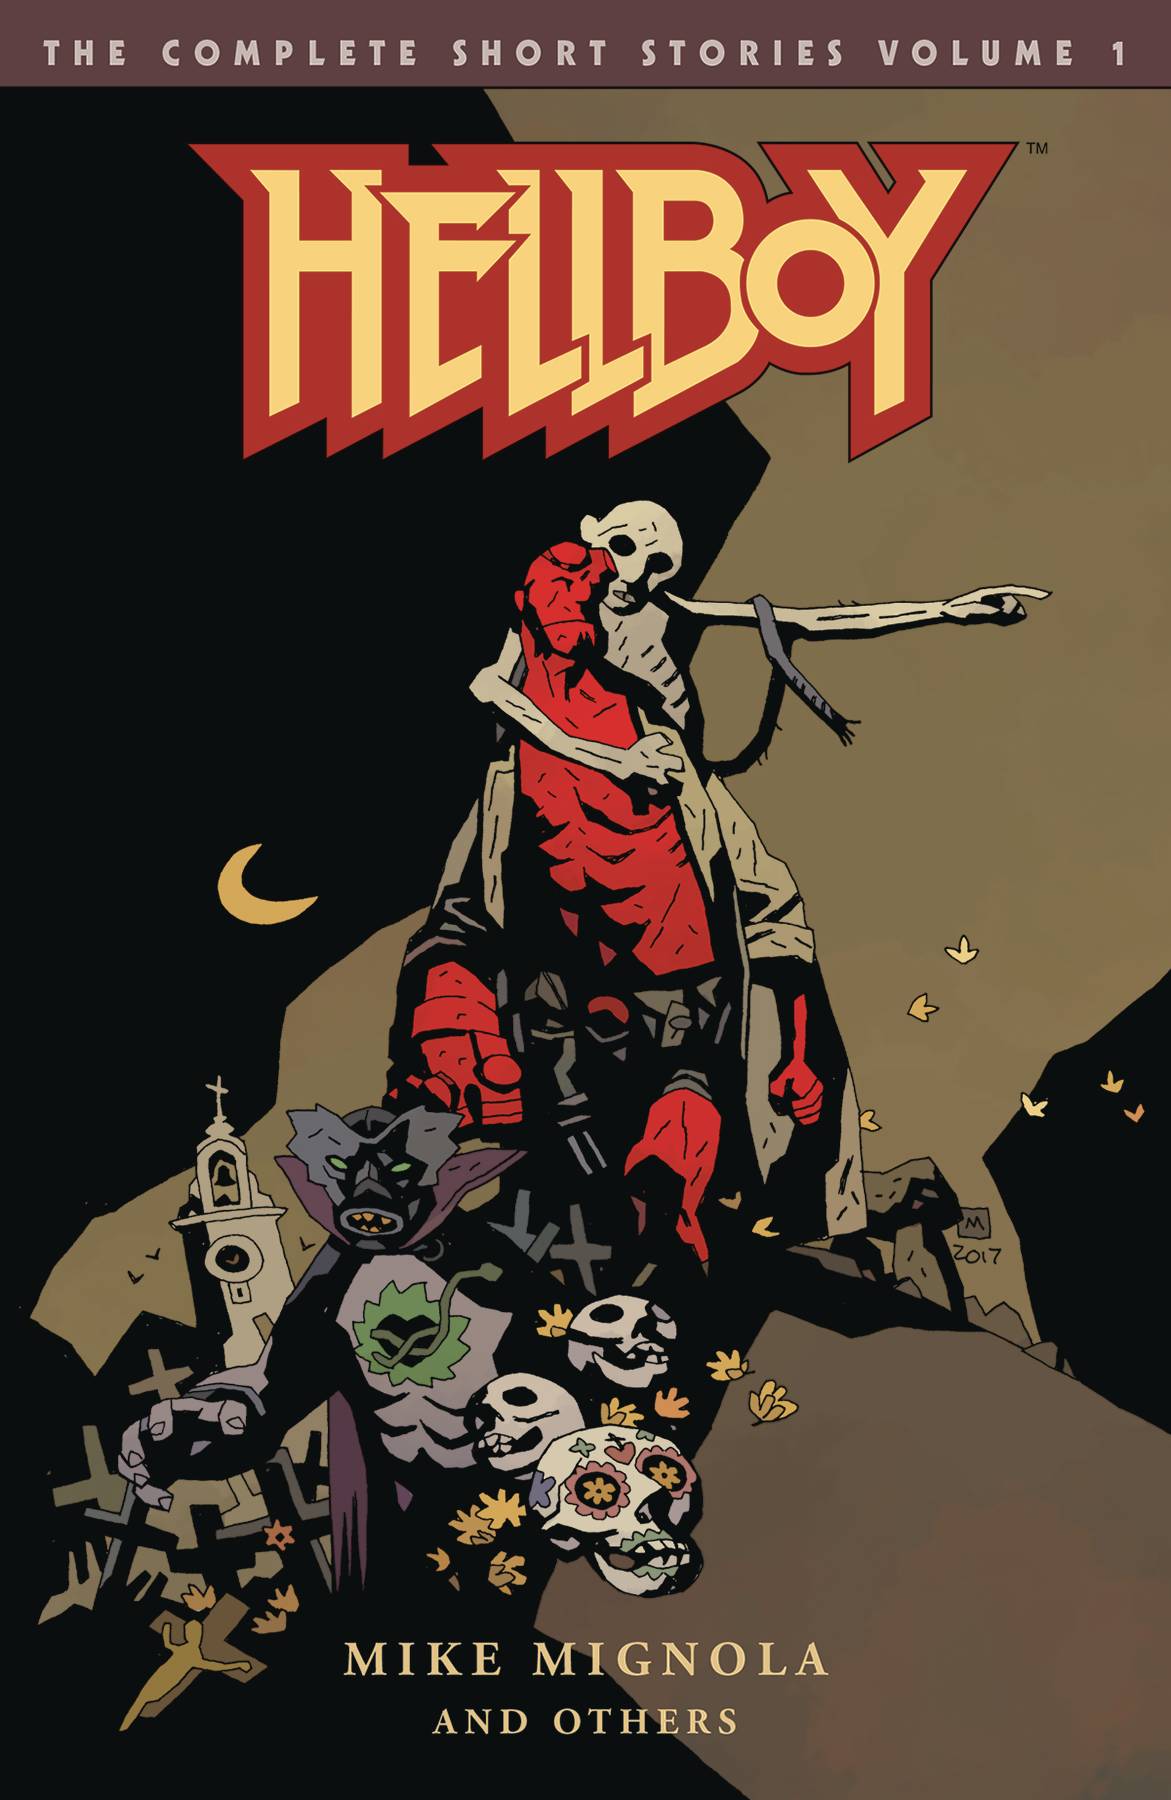 Hellboy: The Complete Short Stories vol 1 s/c